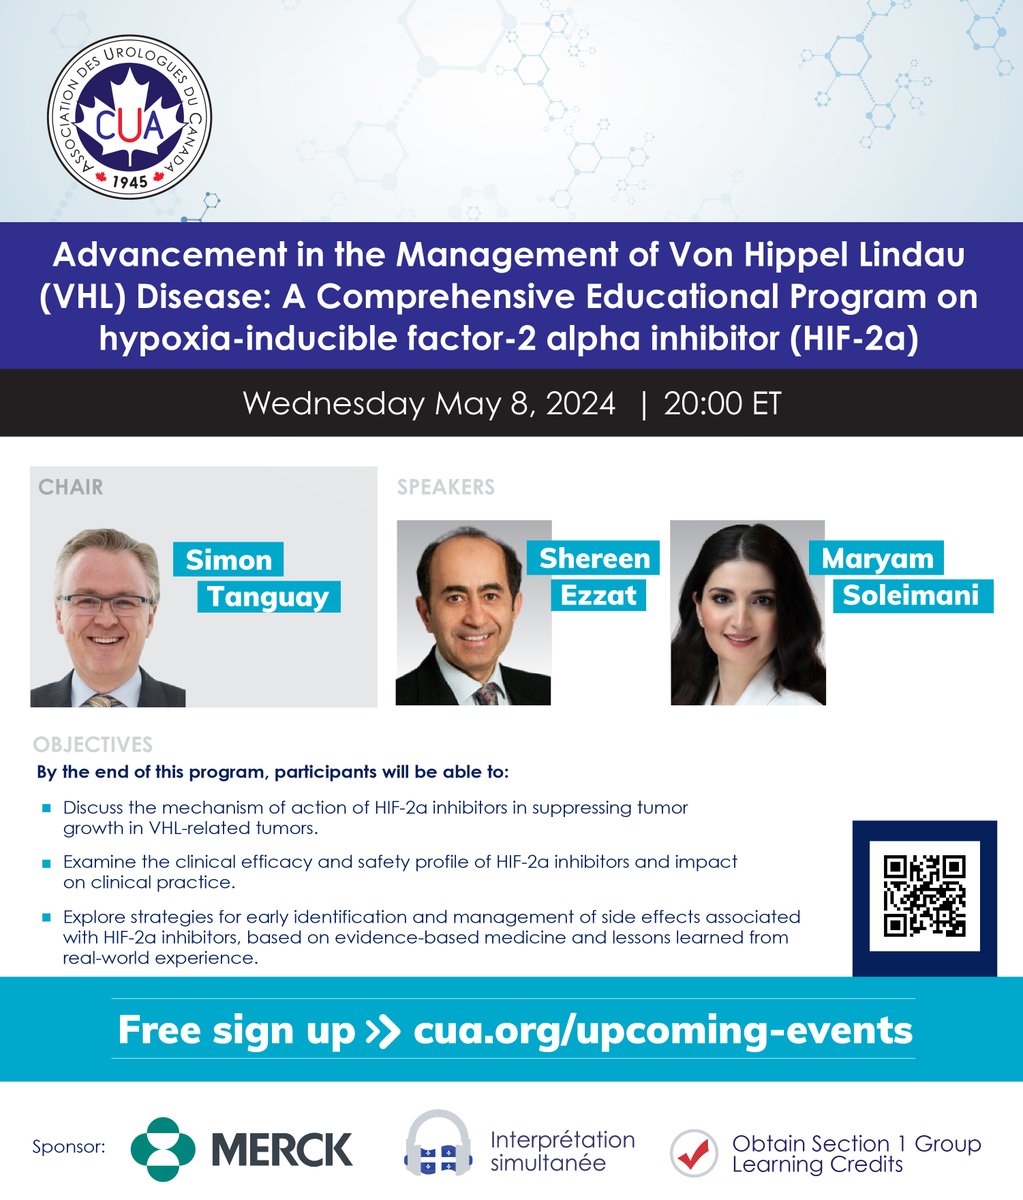 JOIN US for: Advancement in the management of Von Hippel Lindau (VHL) Disease: A Comprehensive Educational Program on hypoxia-inducible factor-2 alpha inhibitor (HIF-2a) Registration is free:cua.org/event/25273 @SiTanguay @MSoleimani_MD